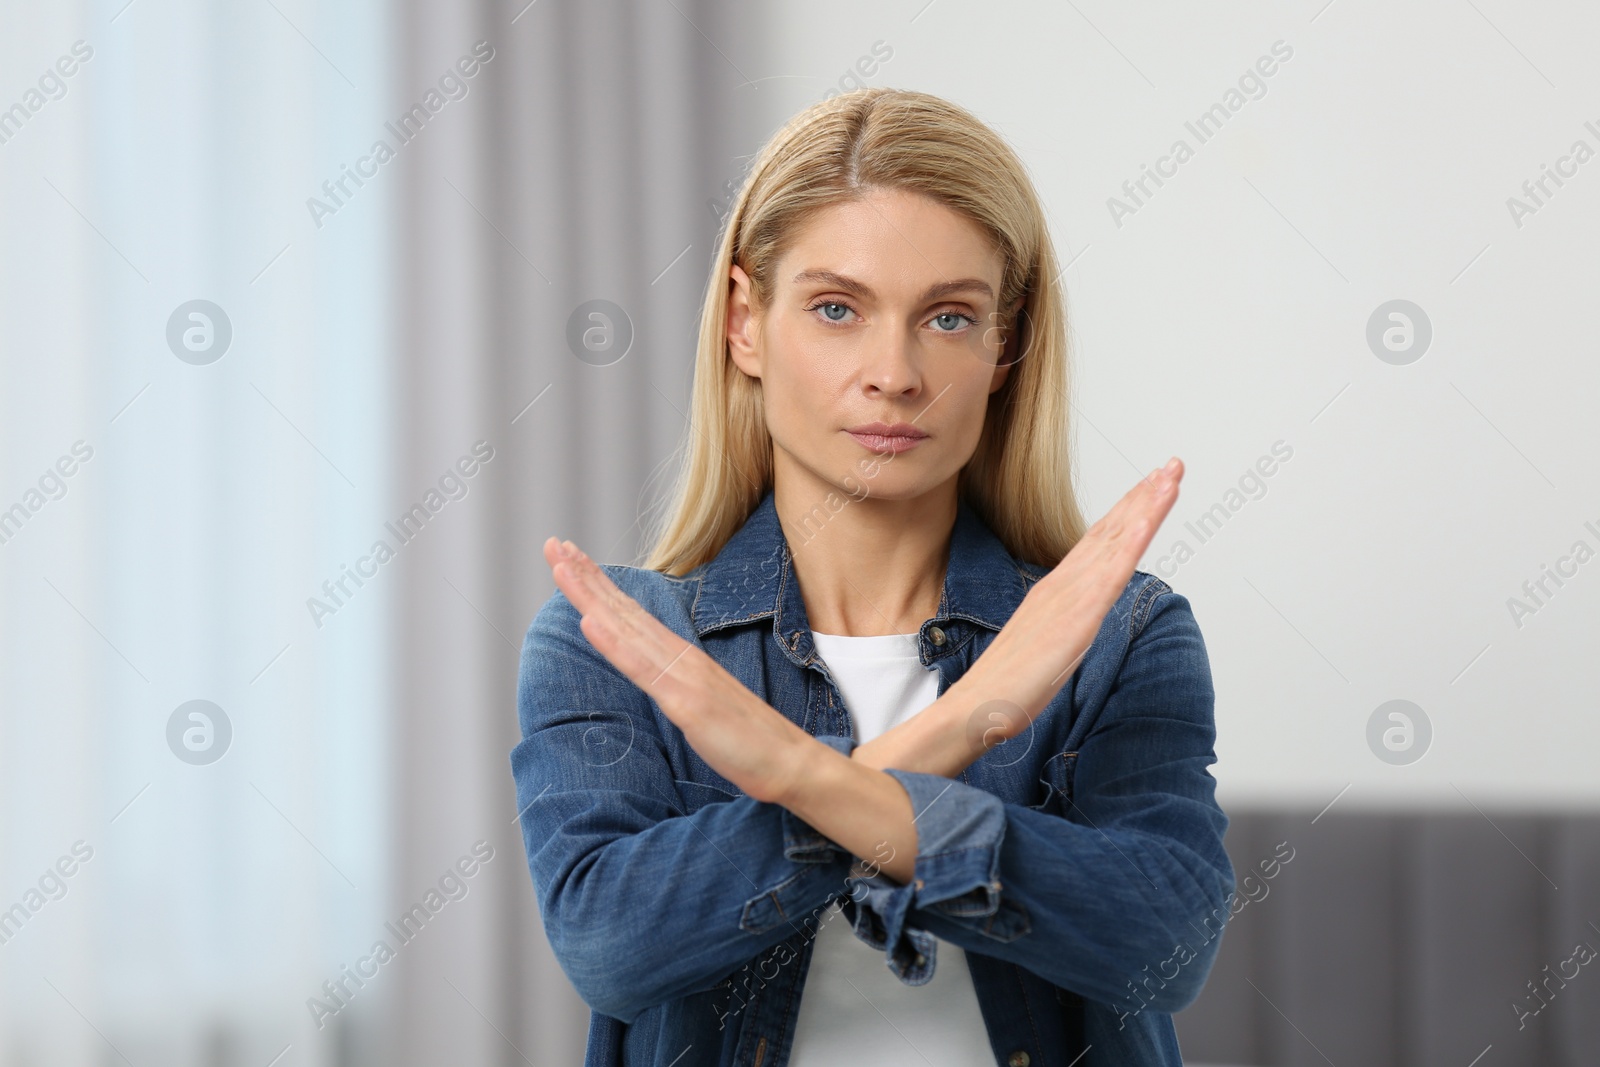 Photo of Stop gesture. Woman with crossed hands in room